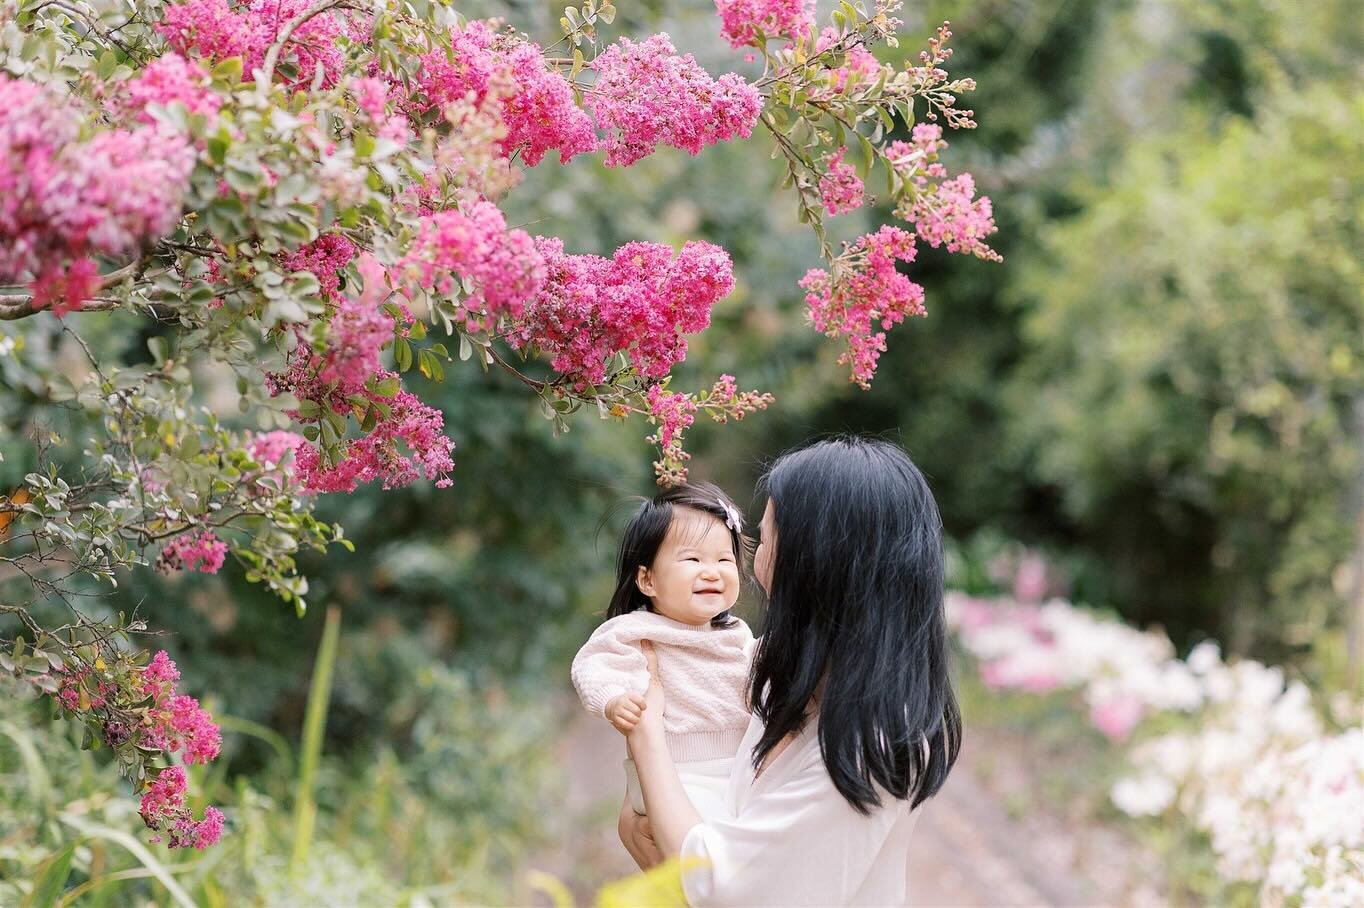 Way too many favourites from these session. I got the photograph this family from maternity, newborn and now first year. It&rsquo;s beautiful to be part of their memorable milestones from the start. 

Crepe Myrtle trees and blooms symbolizes beauty a